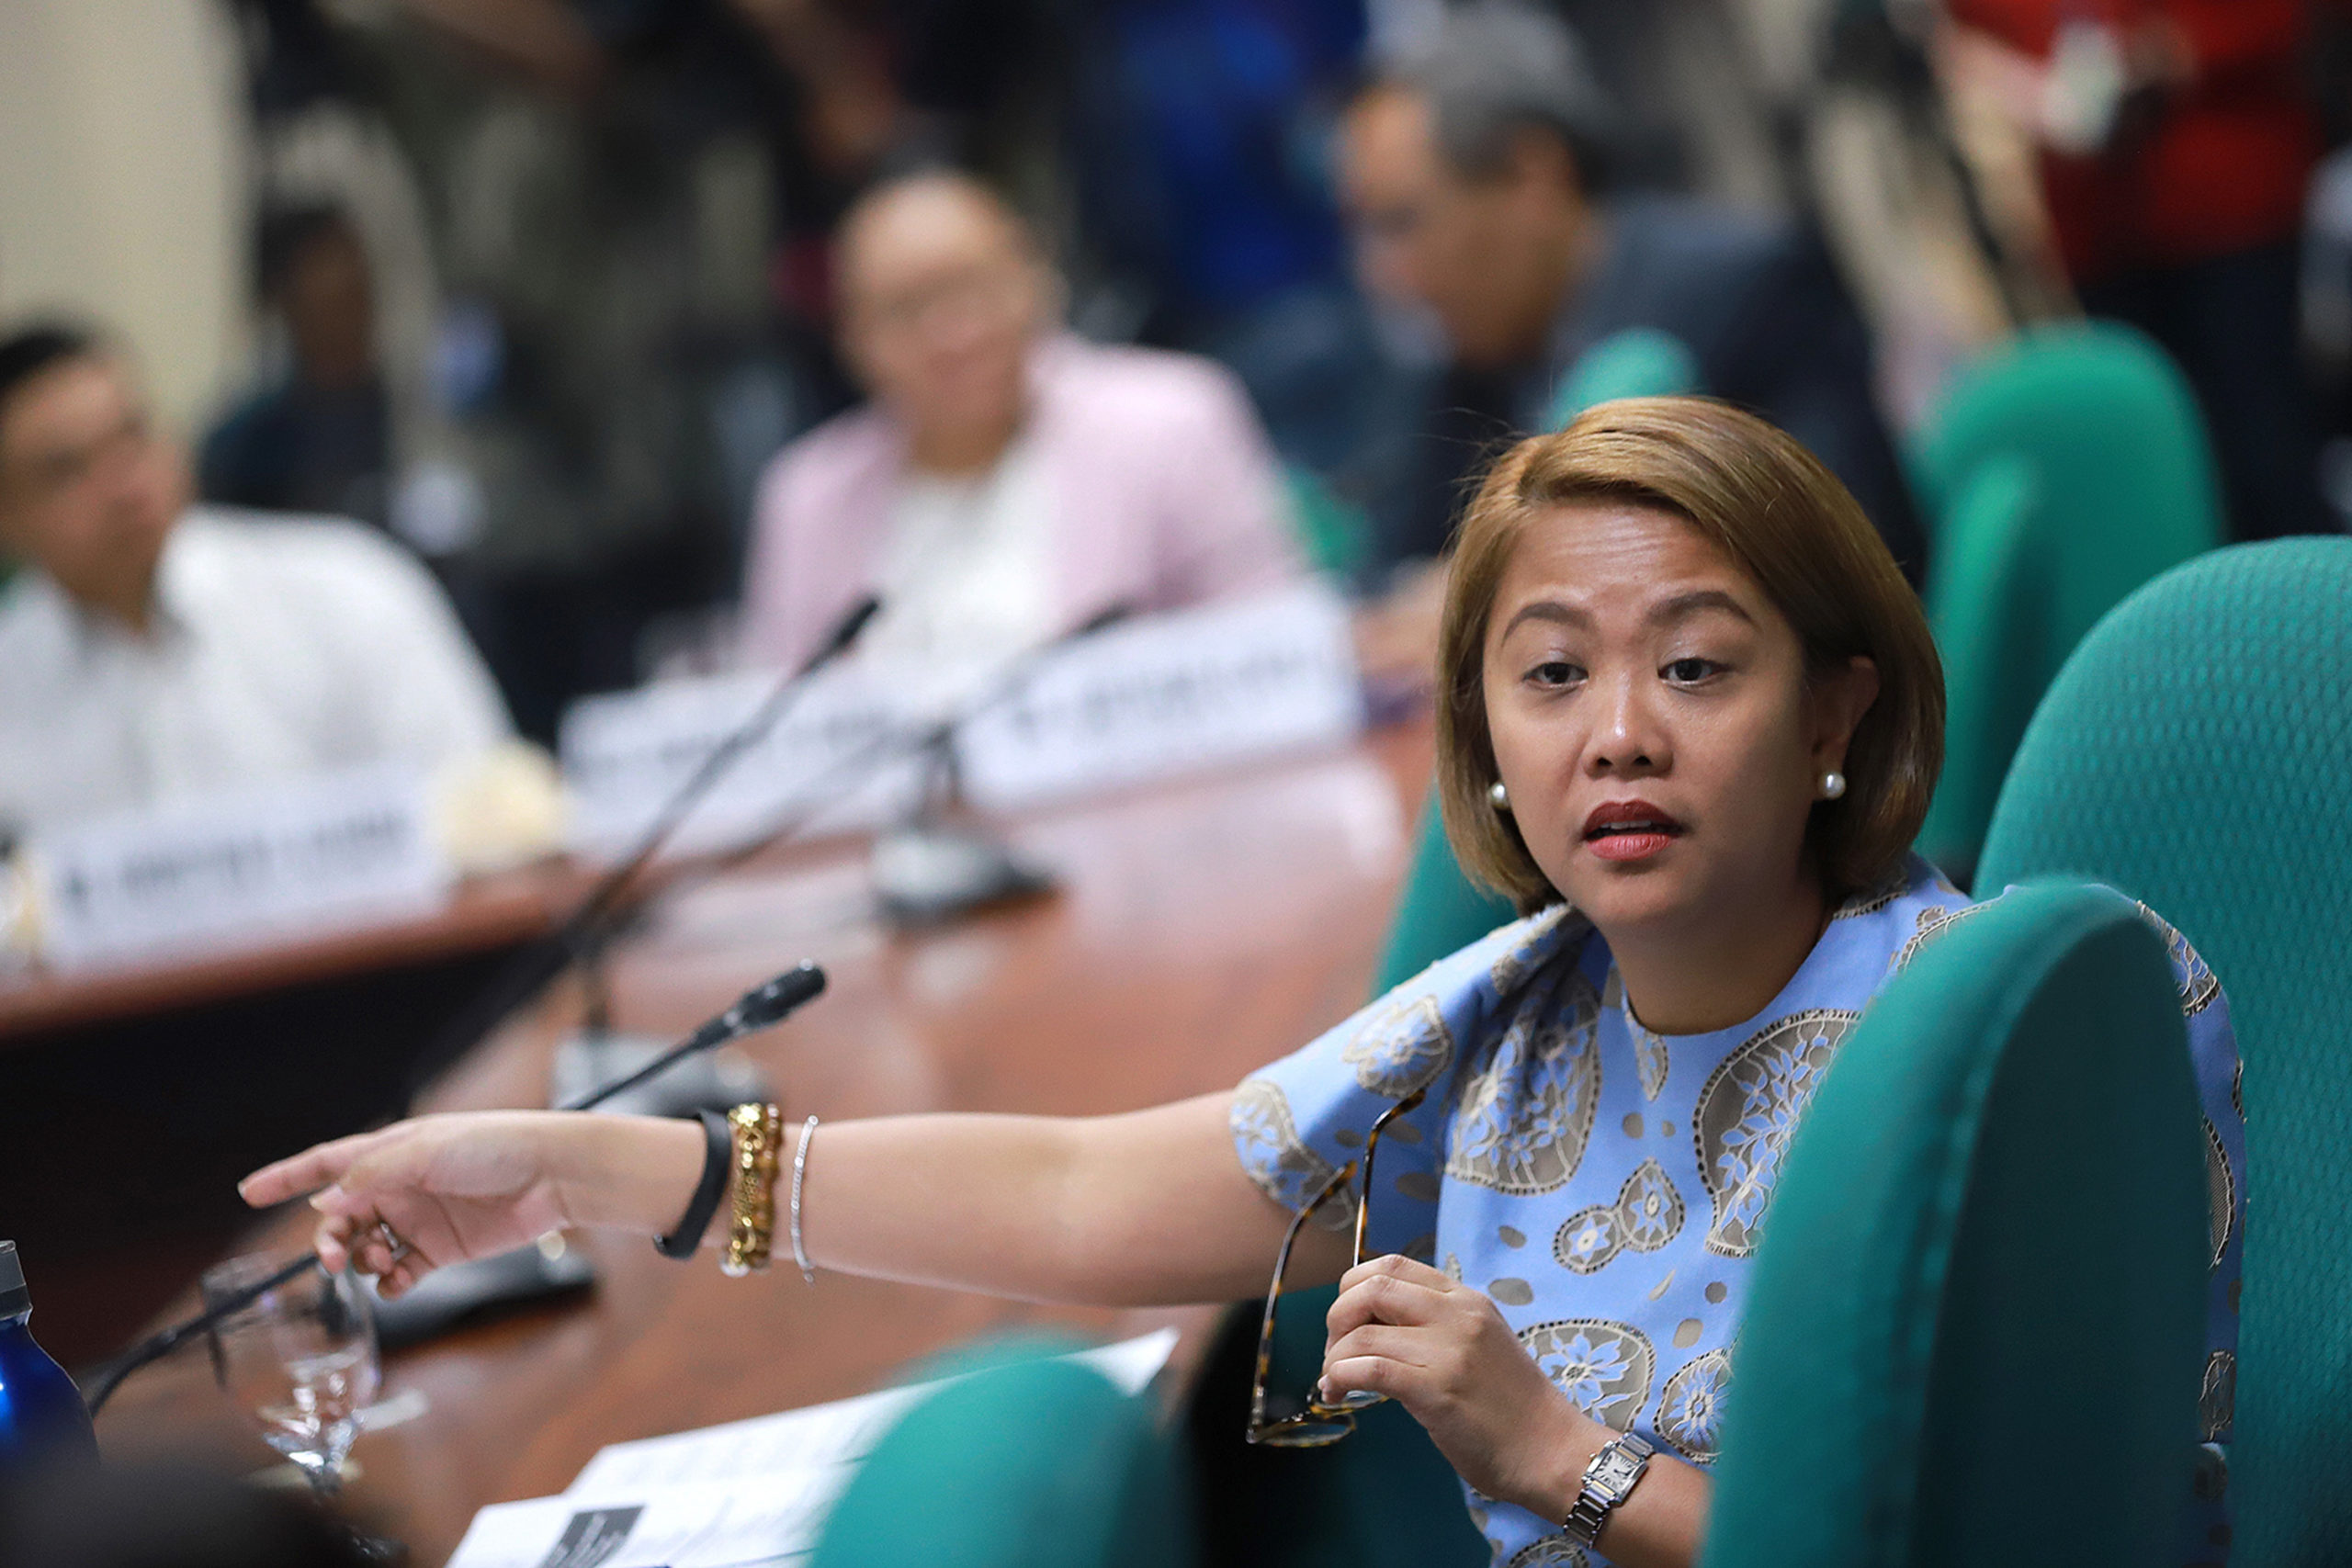 Sen. Nancy Binay, chairperson of the Committee on Tourism, listens to officials from the airline industry as they reported a huge decrease in their flight sales due to the 2019 nCoV. “We have cancellations in our domestic flights. That is why we are meeting with tourism officials this afternoon so we can come up with a campaign for domestic tourism,” Paterno Mantaring Jr., Cebu Pacific Vice President for Corporate Affairs, told Binay during Tuesday’s public hearing, February 20, 2020. (Joseph Vidal/Senate PRIB)